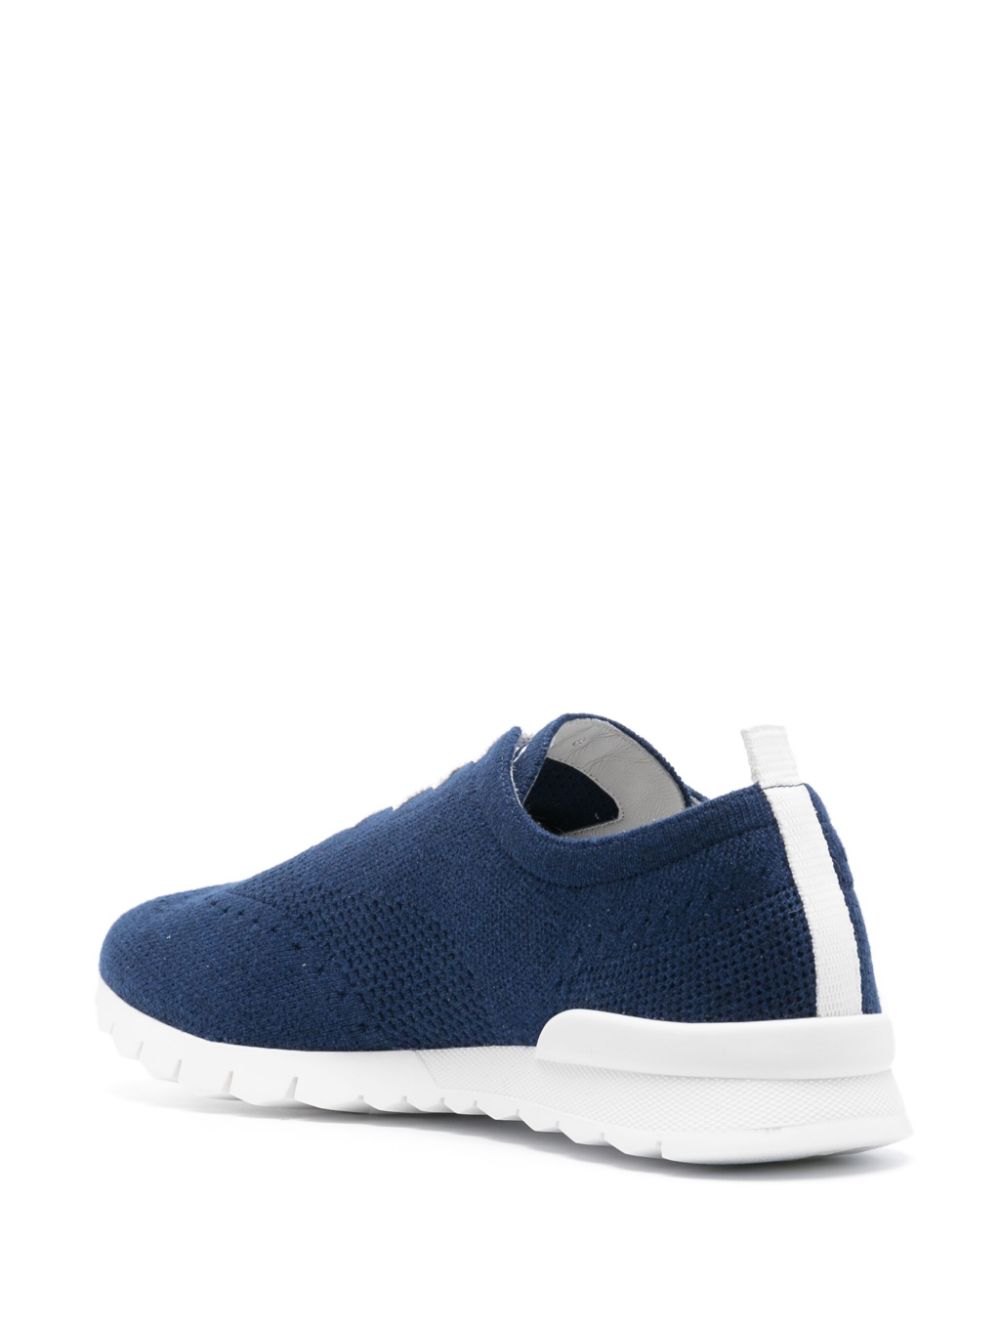 KITON Navy Blue Knit Low-Top Sneakers for Men